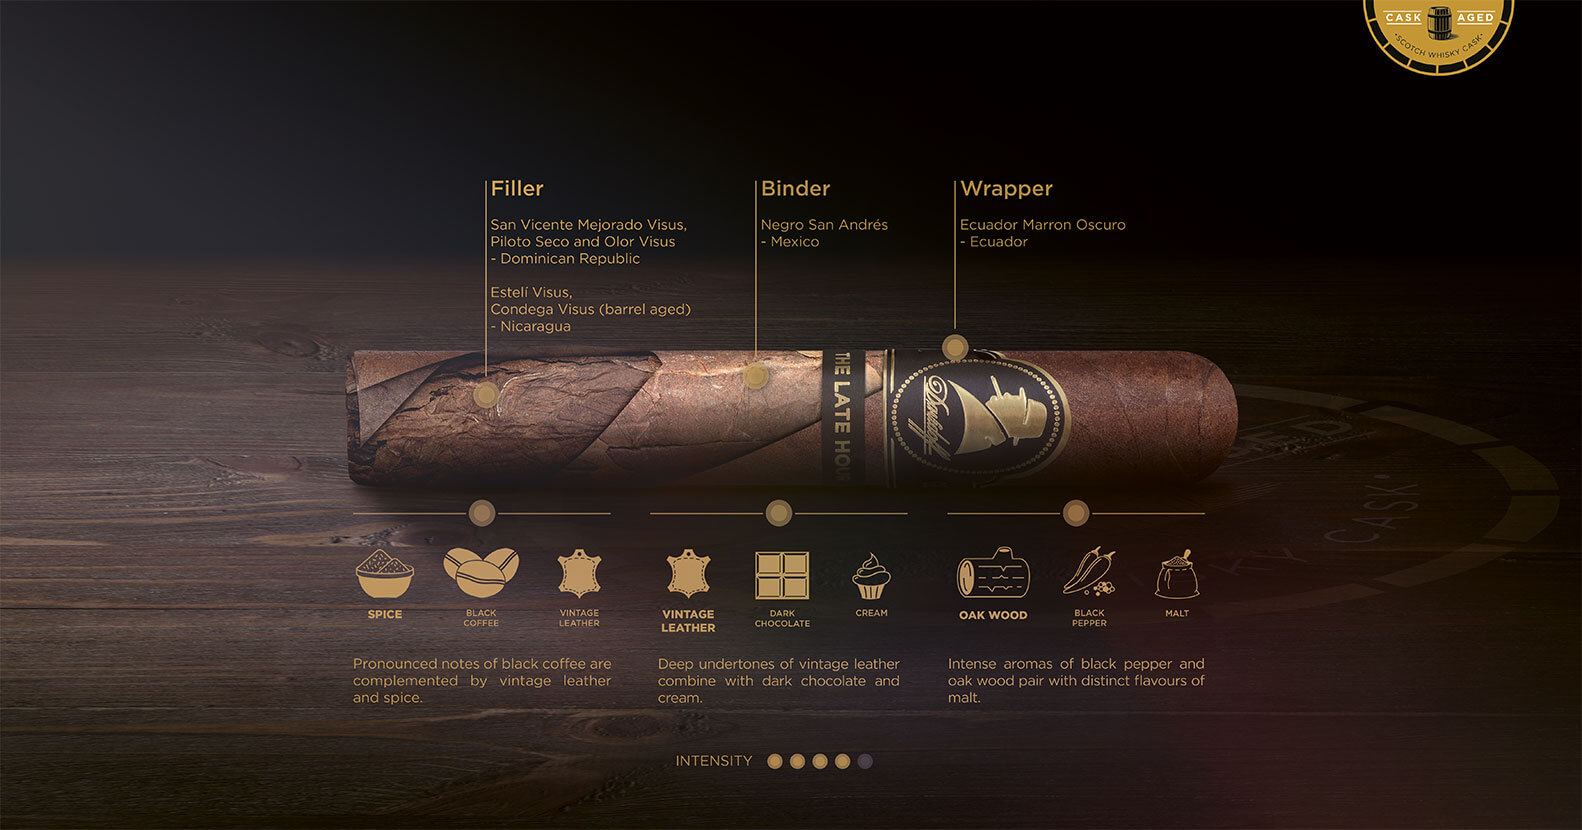 Infographic of a Davidoff Winston Churchill Late Hour Series Cigar with all used tobaccos for the filler, binder and wrapper and detailed Taste explanation